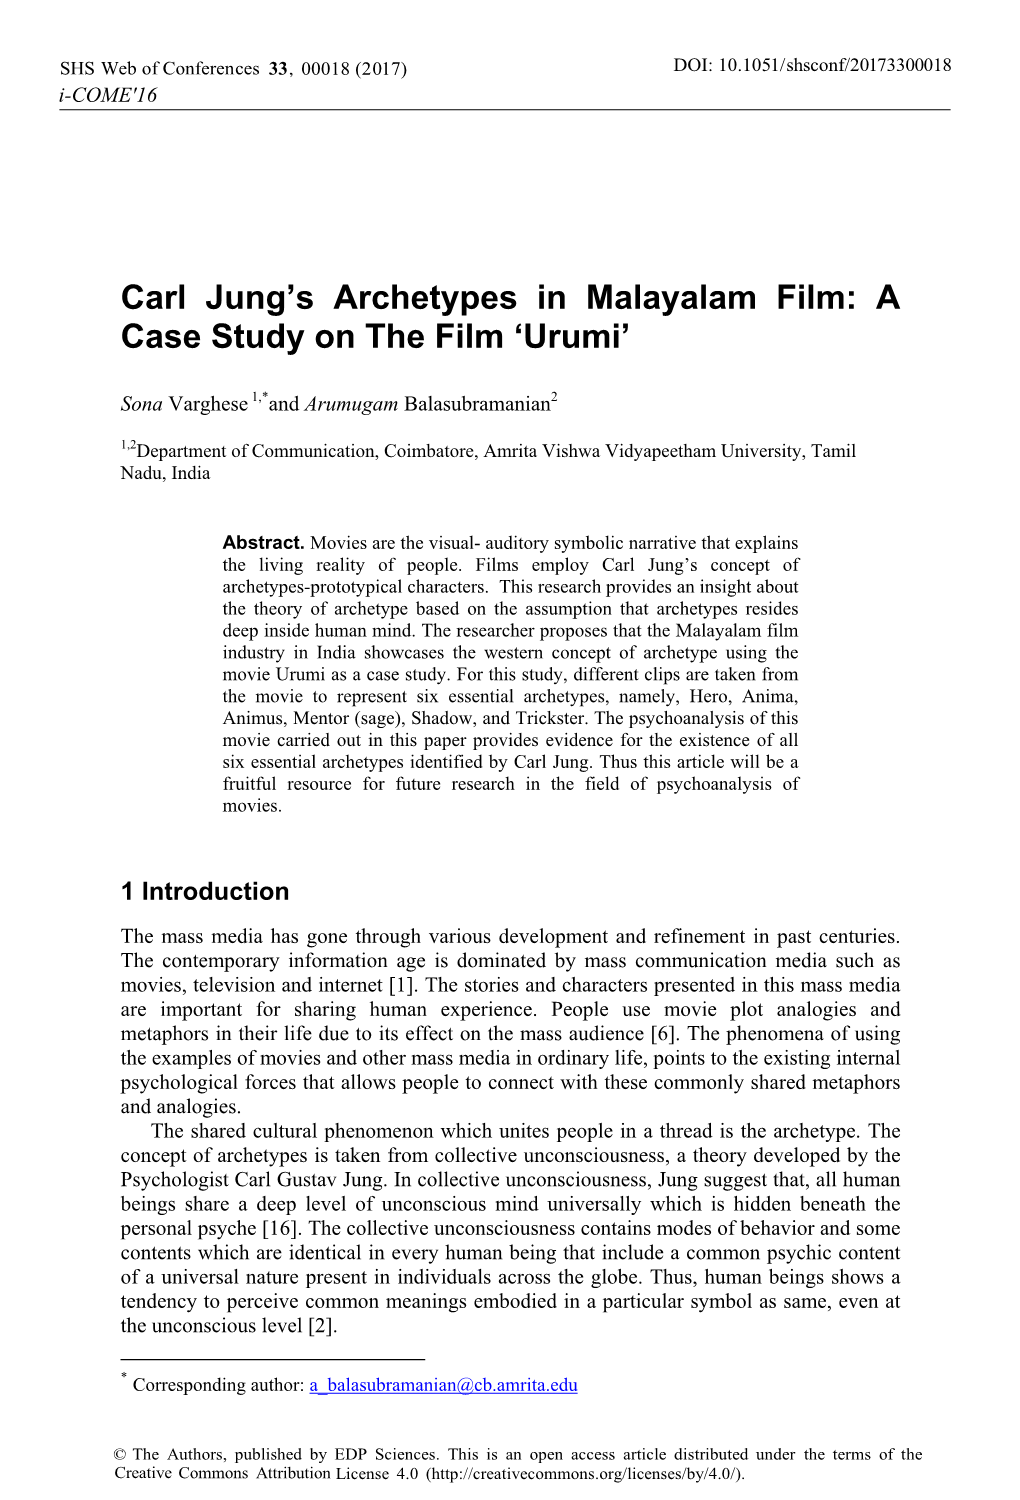 Carl Jung's Archetypes in Malayalam Film